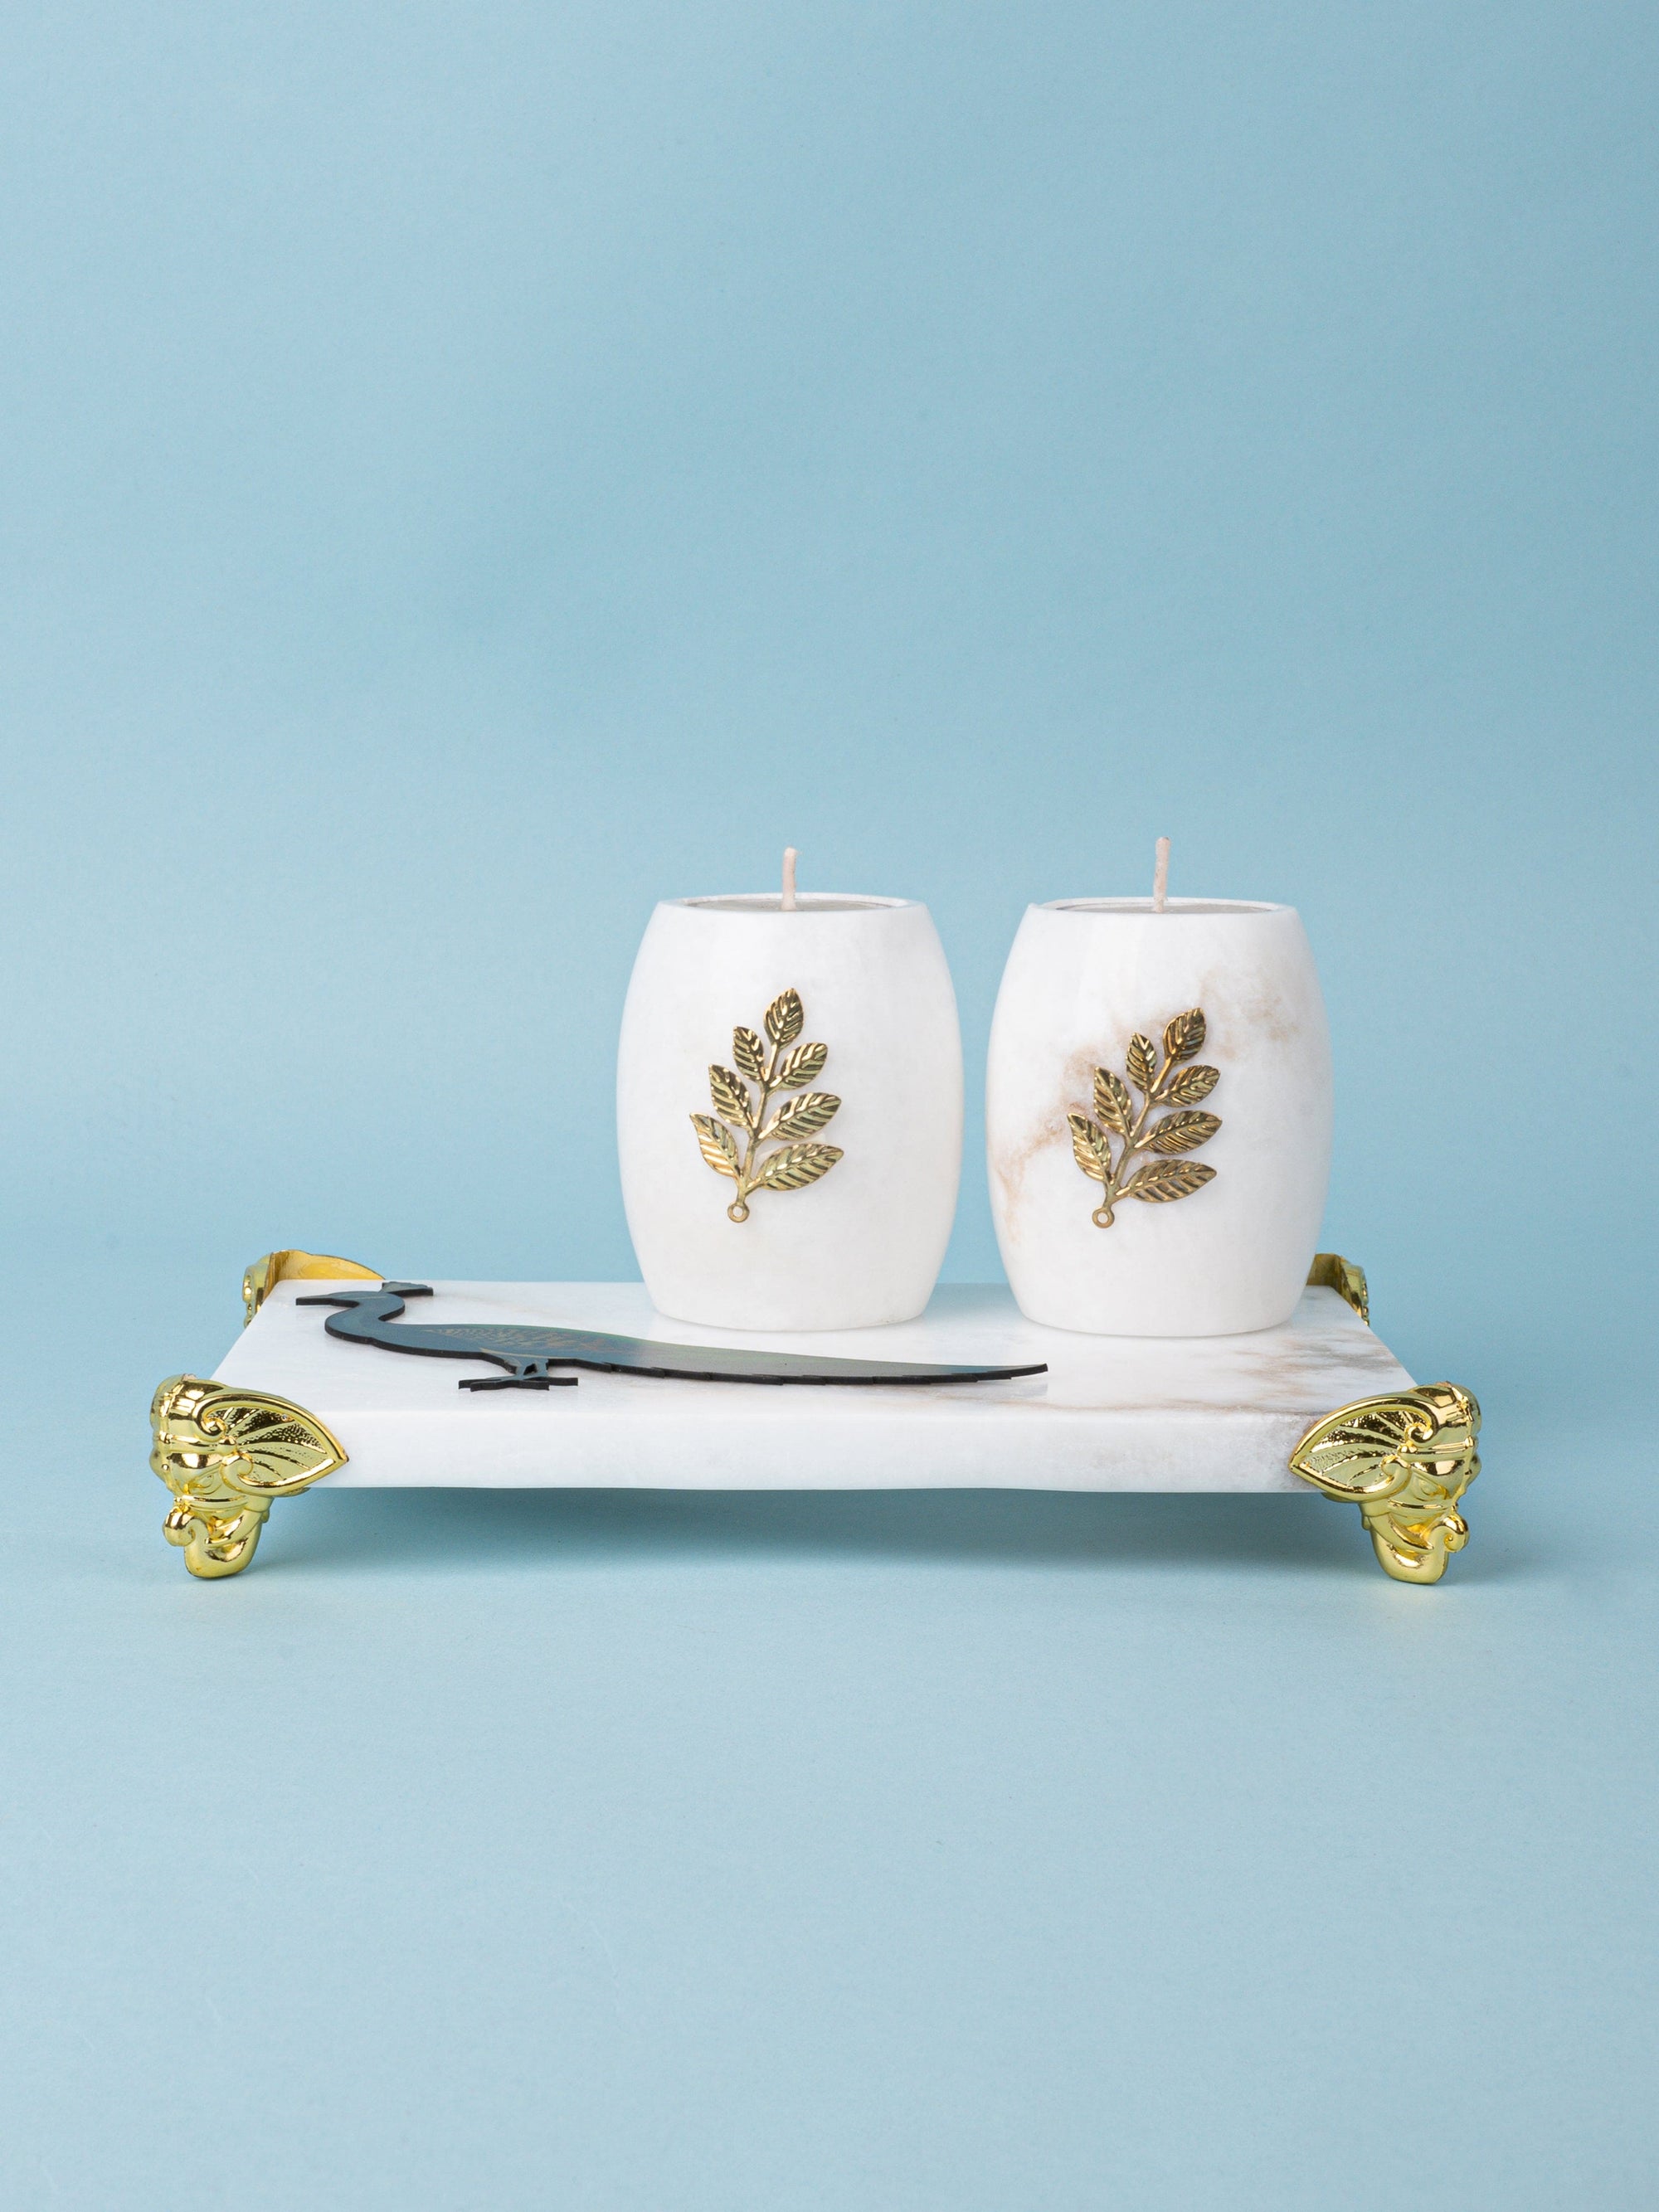 Set of 2 Tea light Candle Holders in a Rectangular Peacock Tray with Golden Legs